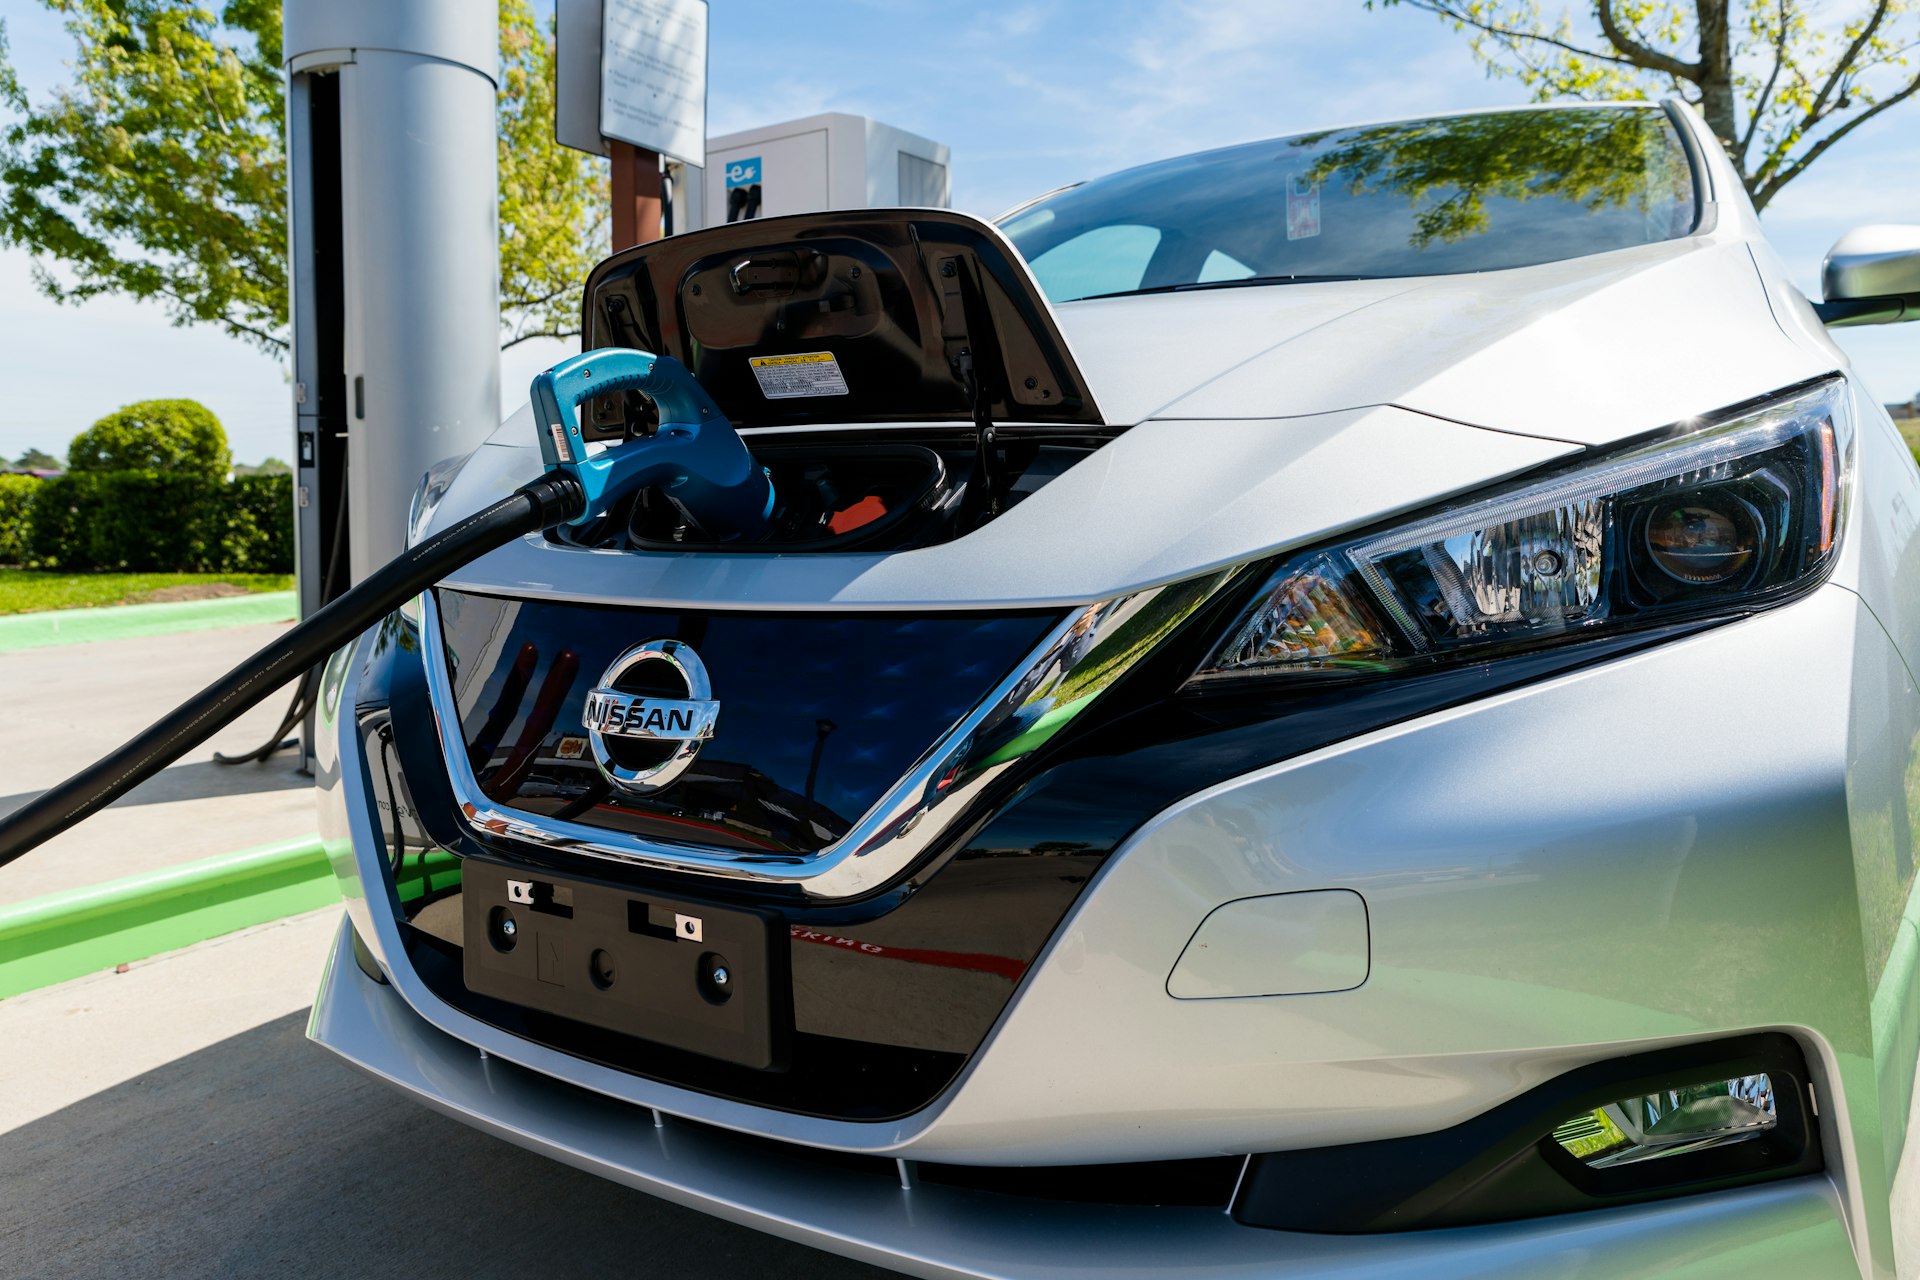 A Nissan Leaf electric car charging at an EVgo charging station